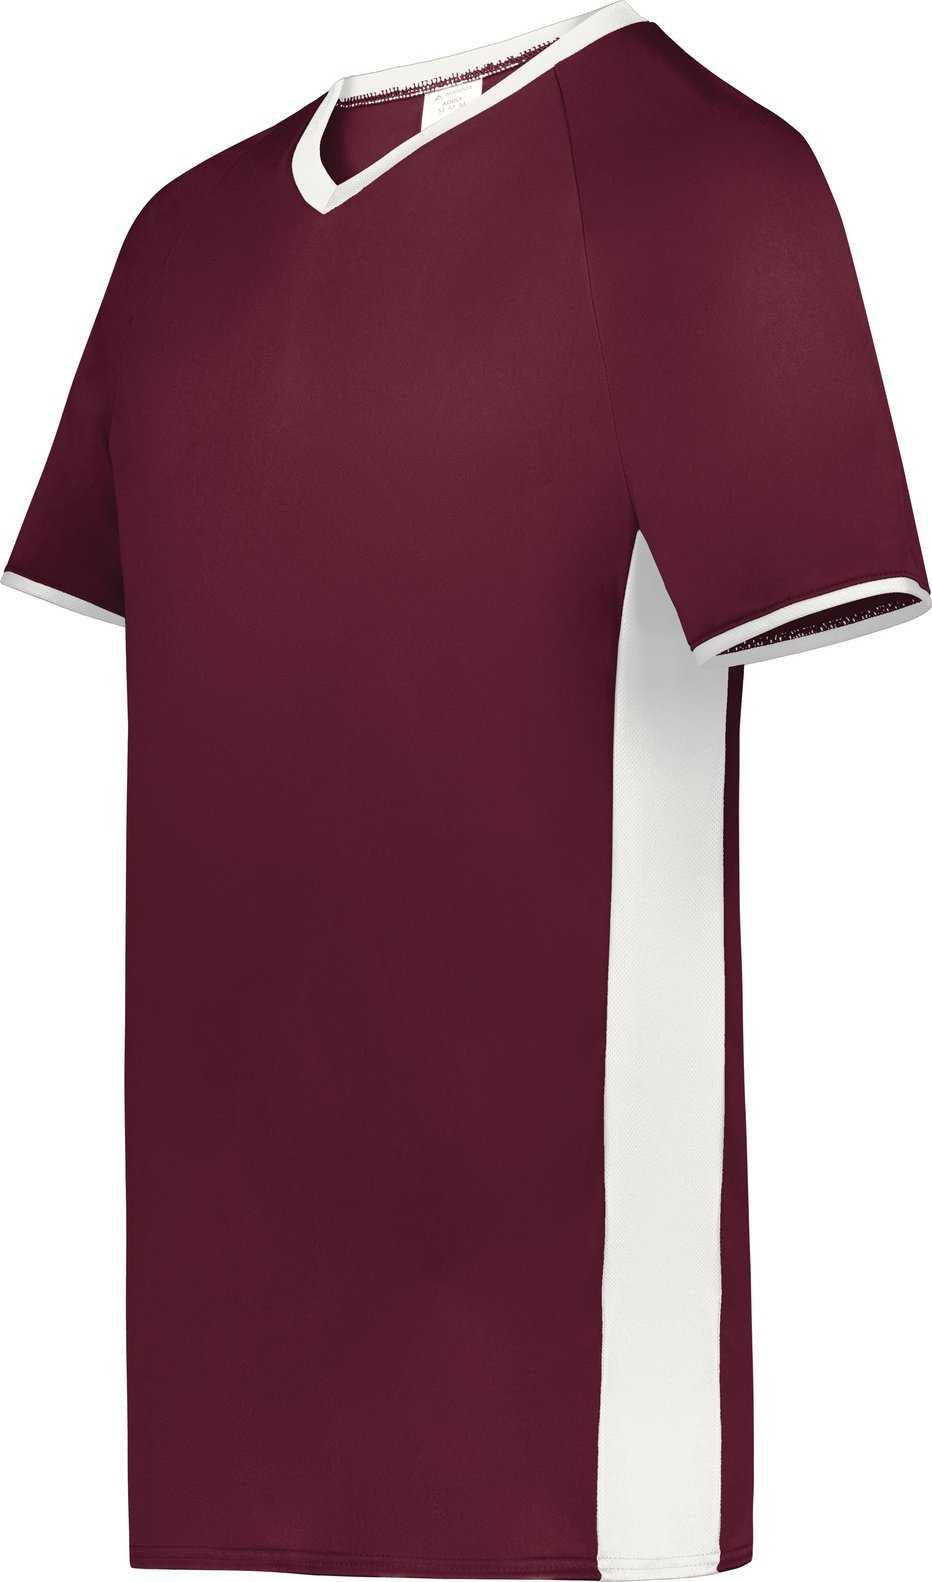 Augusta 6907 Cutter+ V-Neck Jersey - Maroon White - HIT a Double